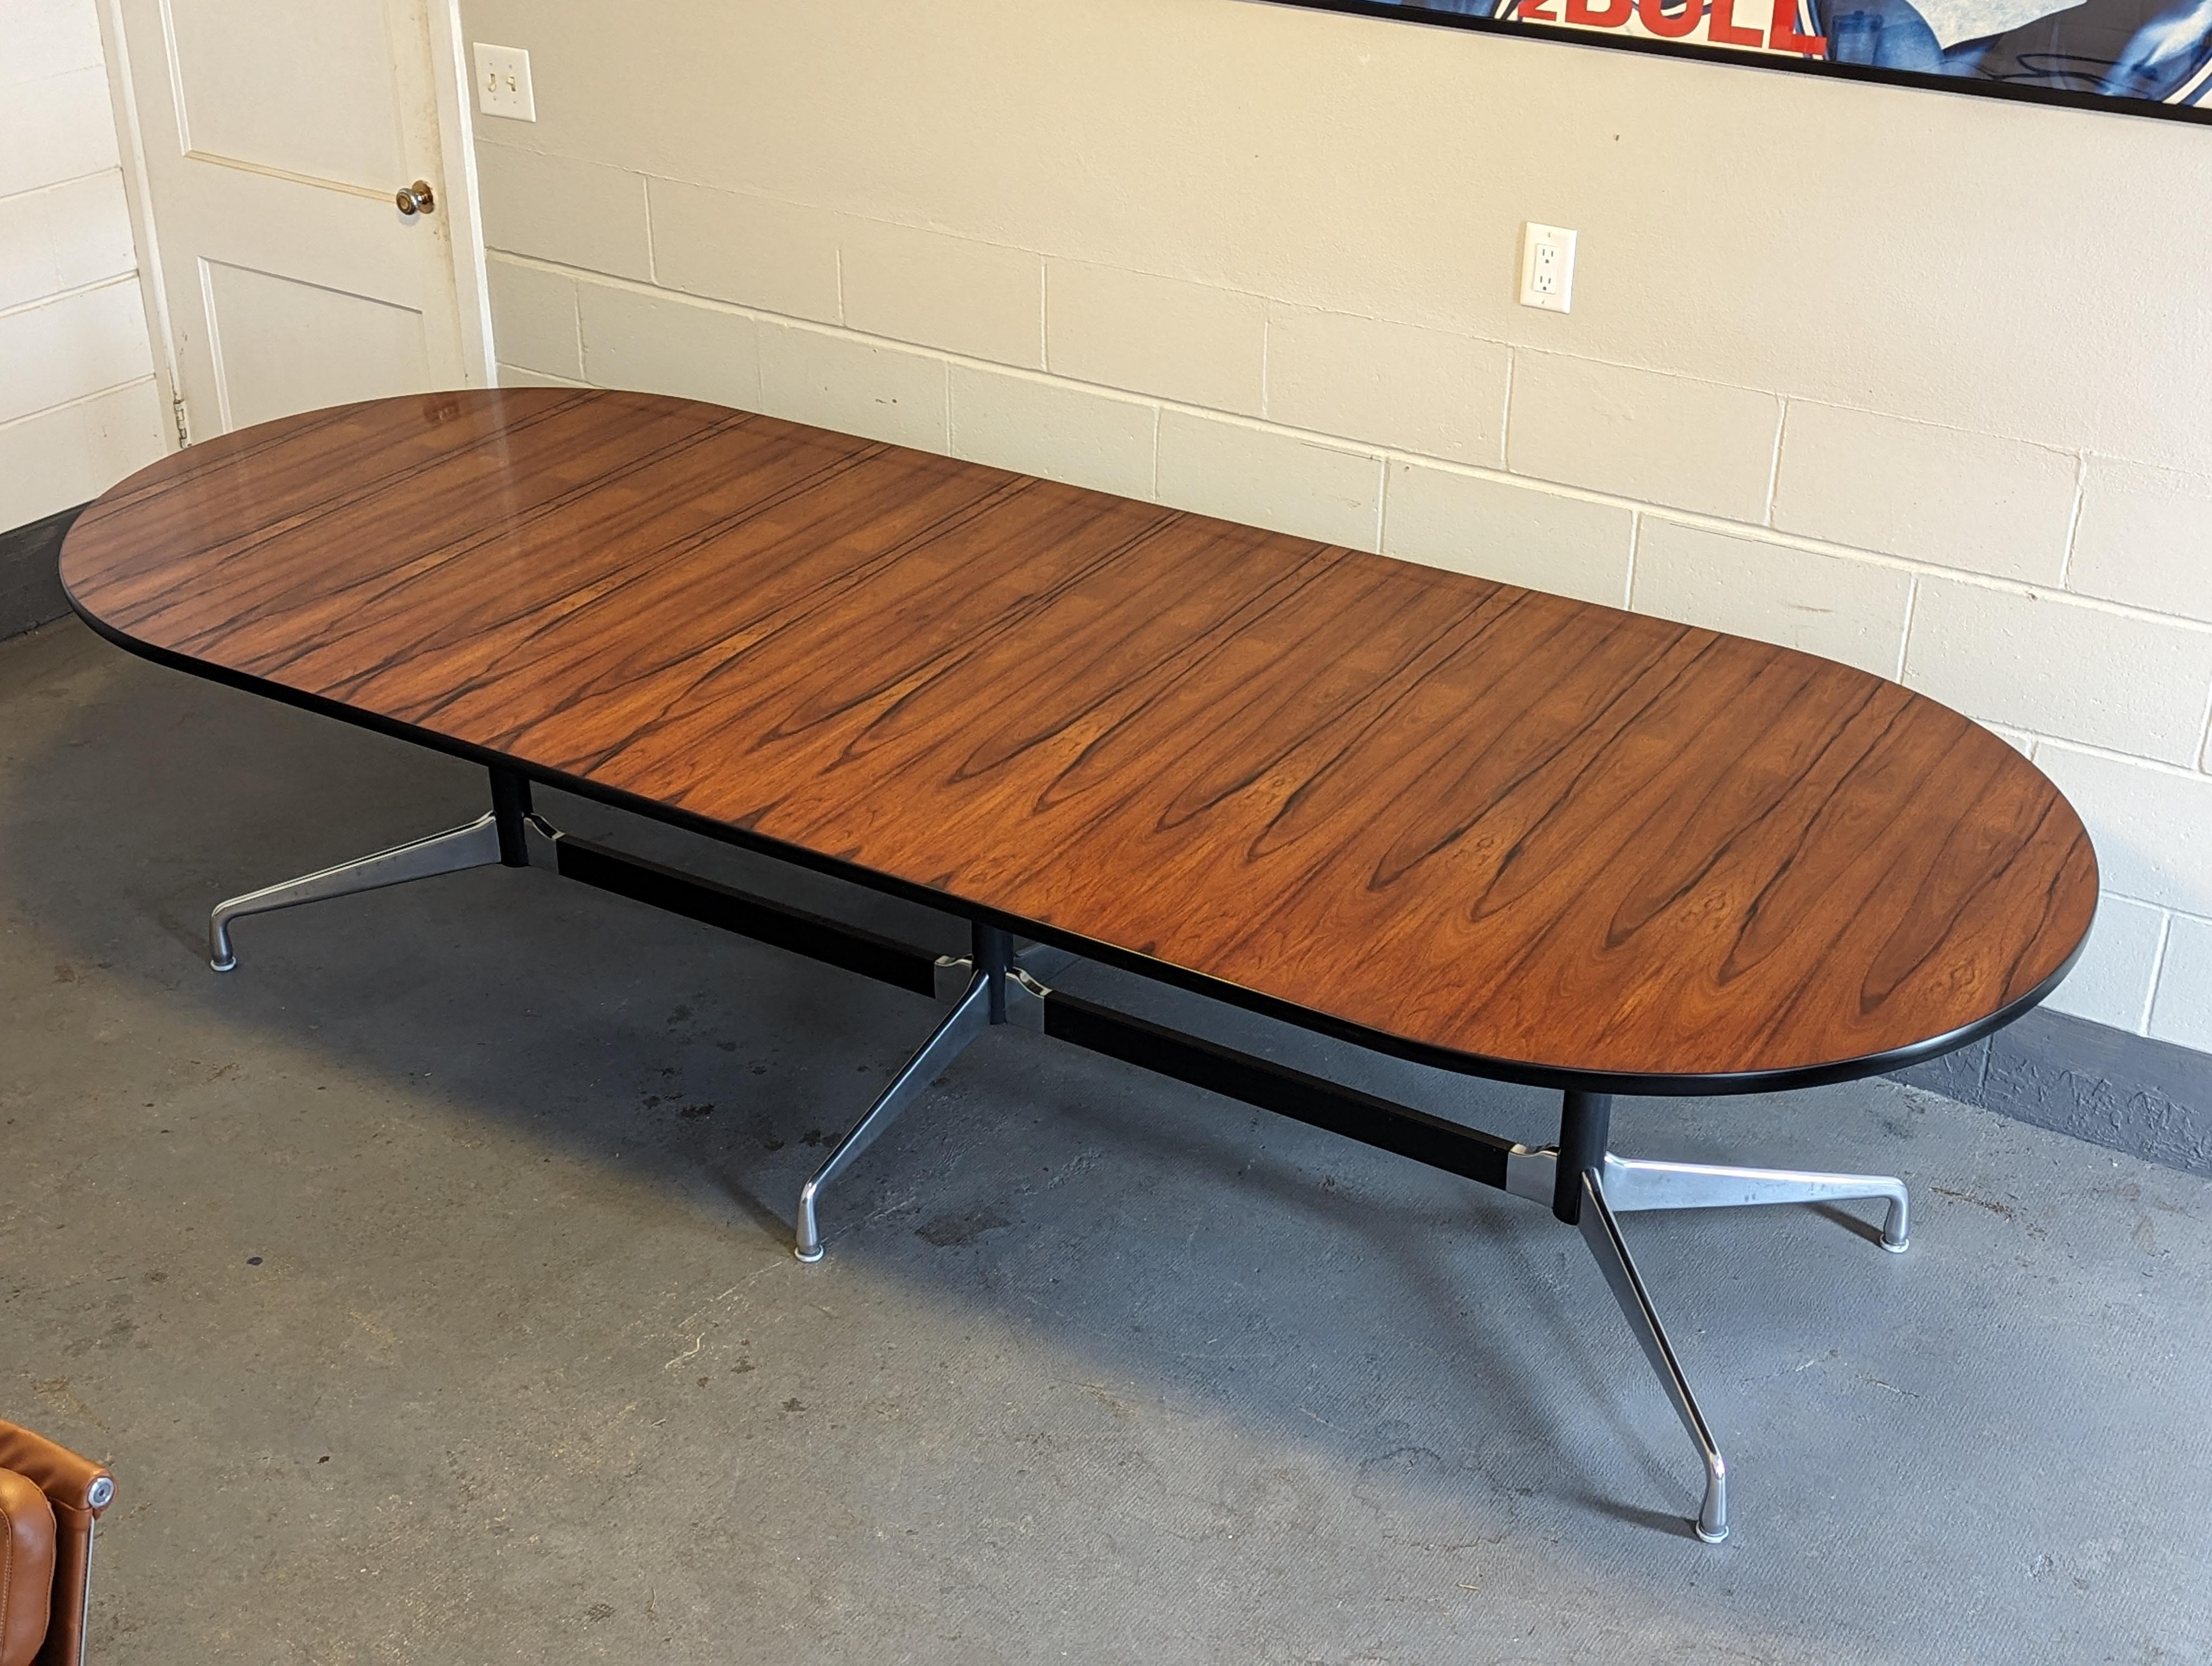 Stunning 10 foot Eames segmented base table.

Incredible rosewood color and grain throughout.

Polished aluminum feet/base contrasting nicely against black supports.

Expansive 118